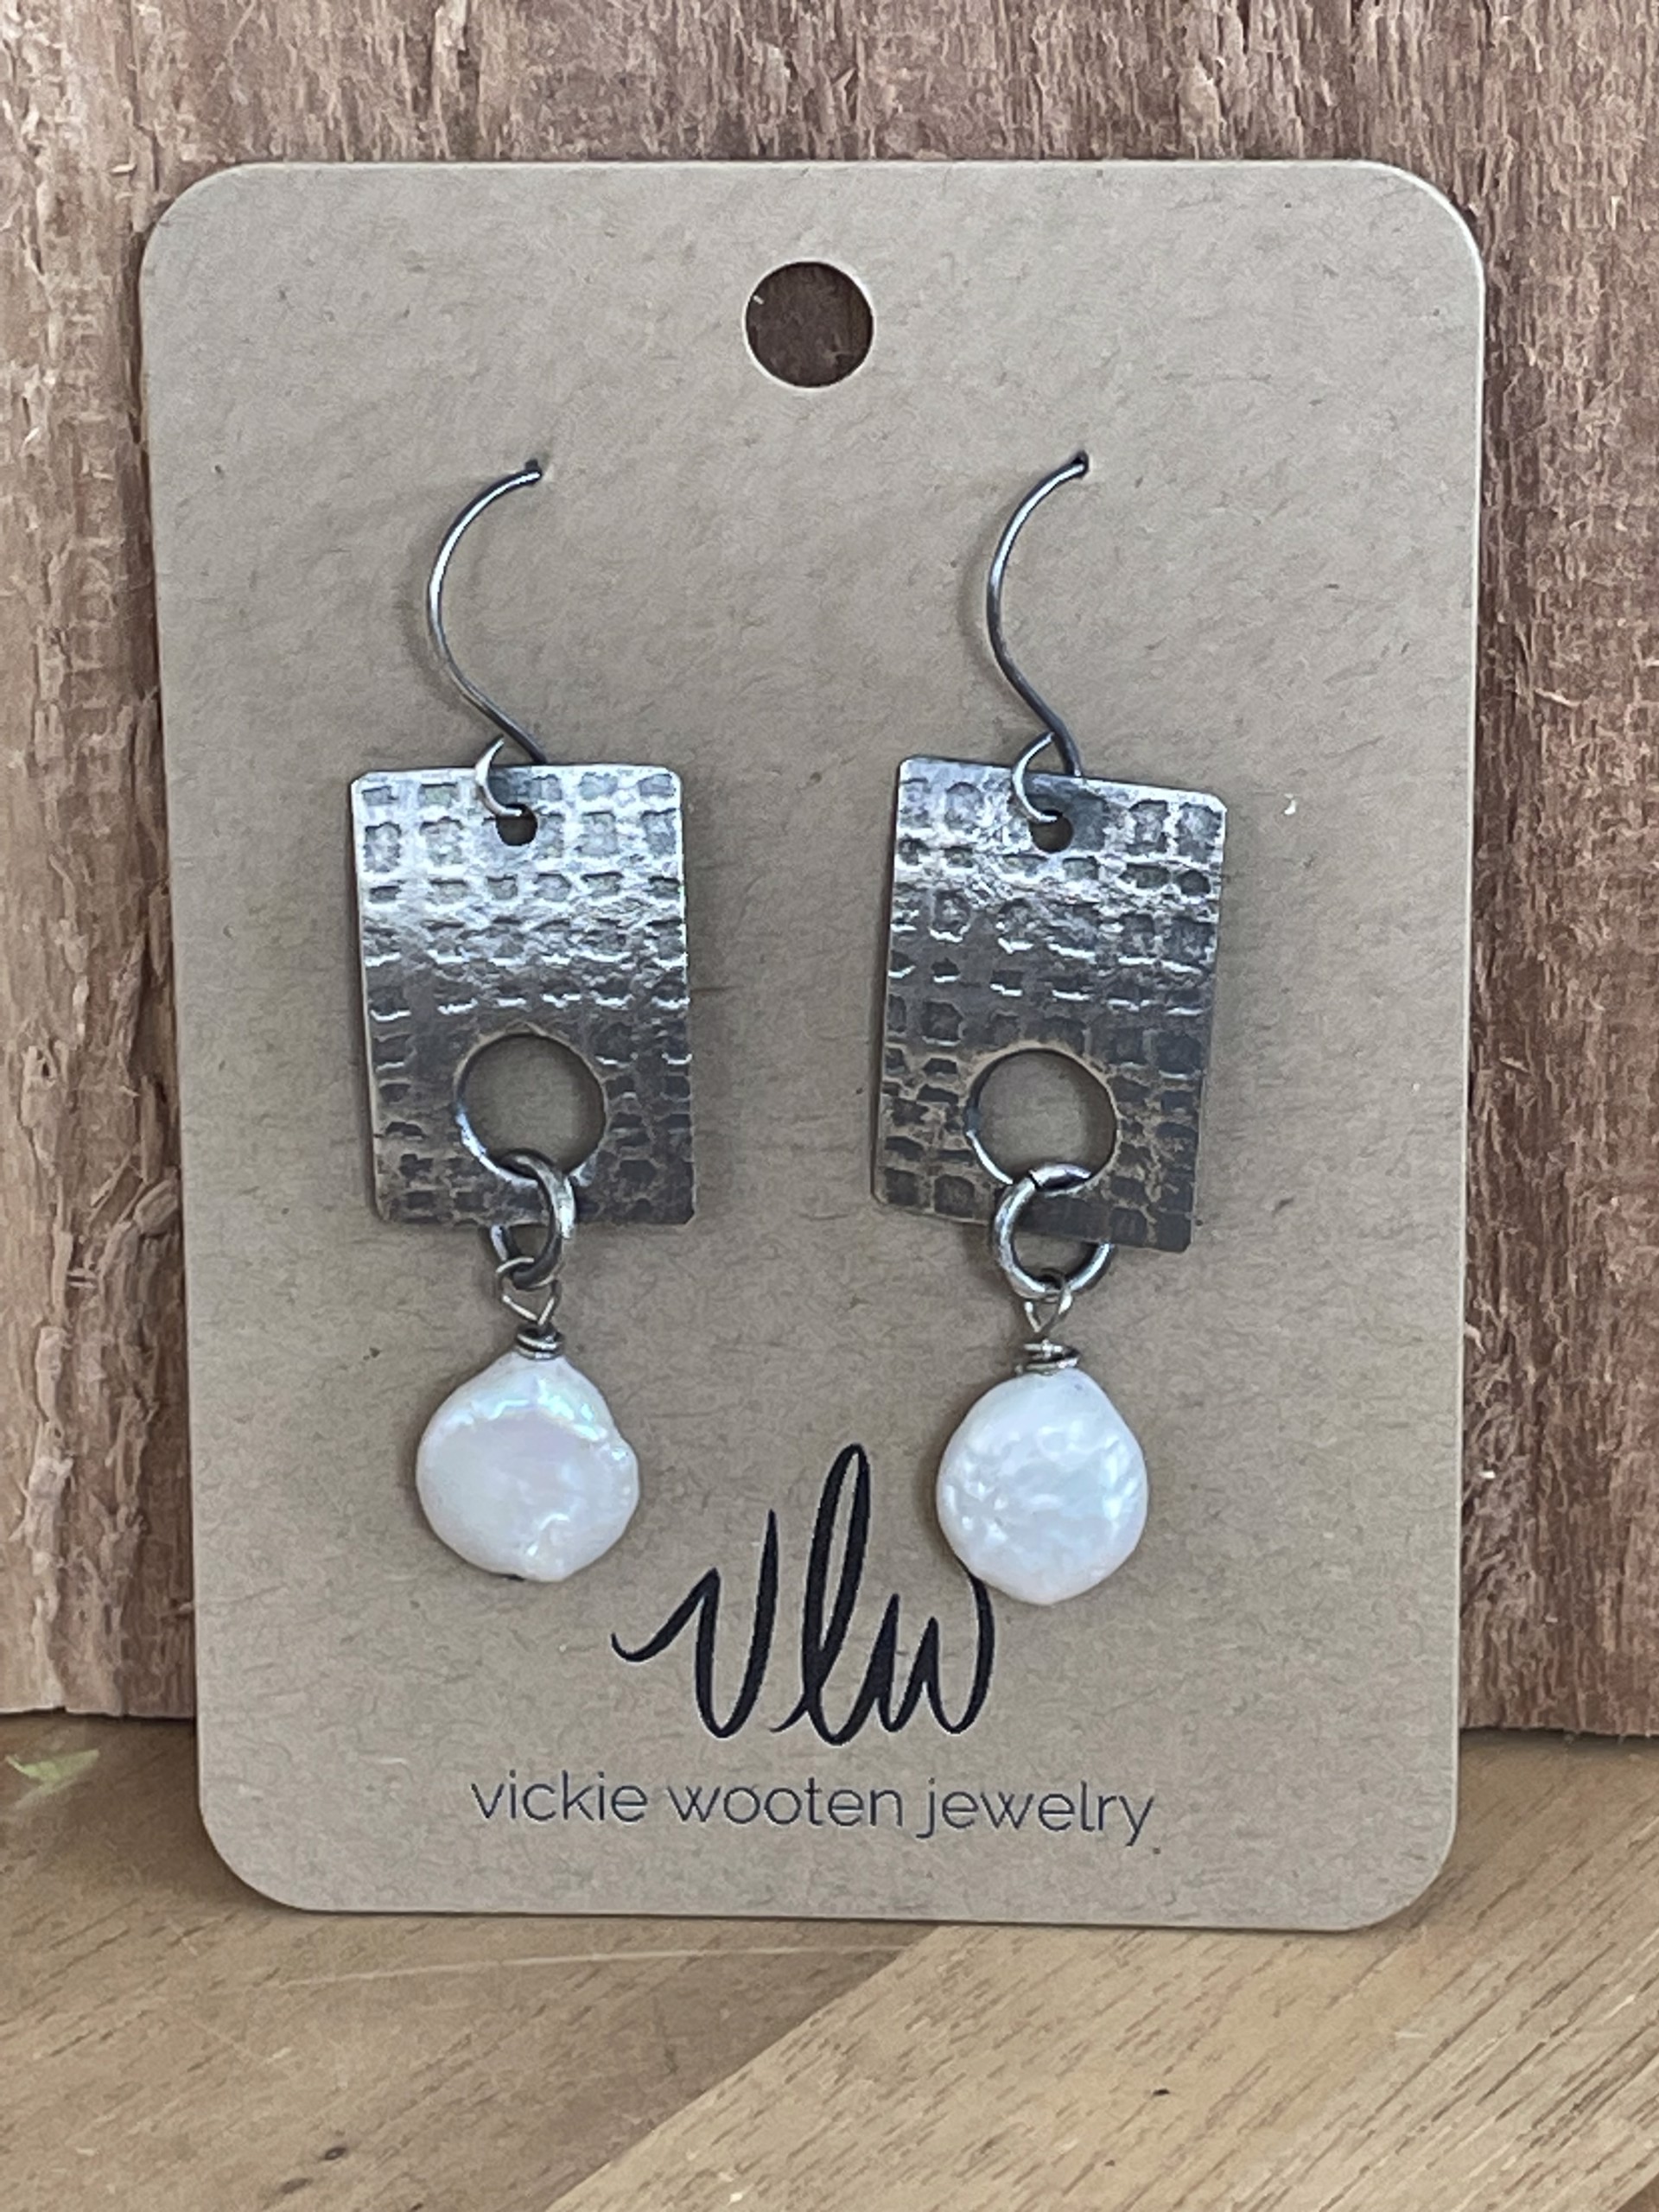 100-22 Sterling Coin Earrings with Pearls by Vickie Wooten